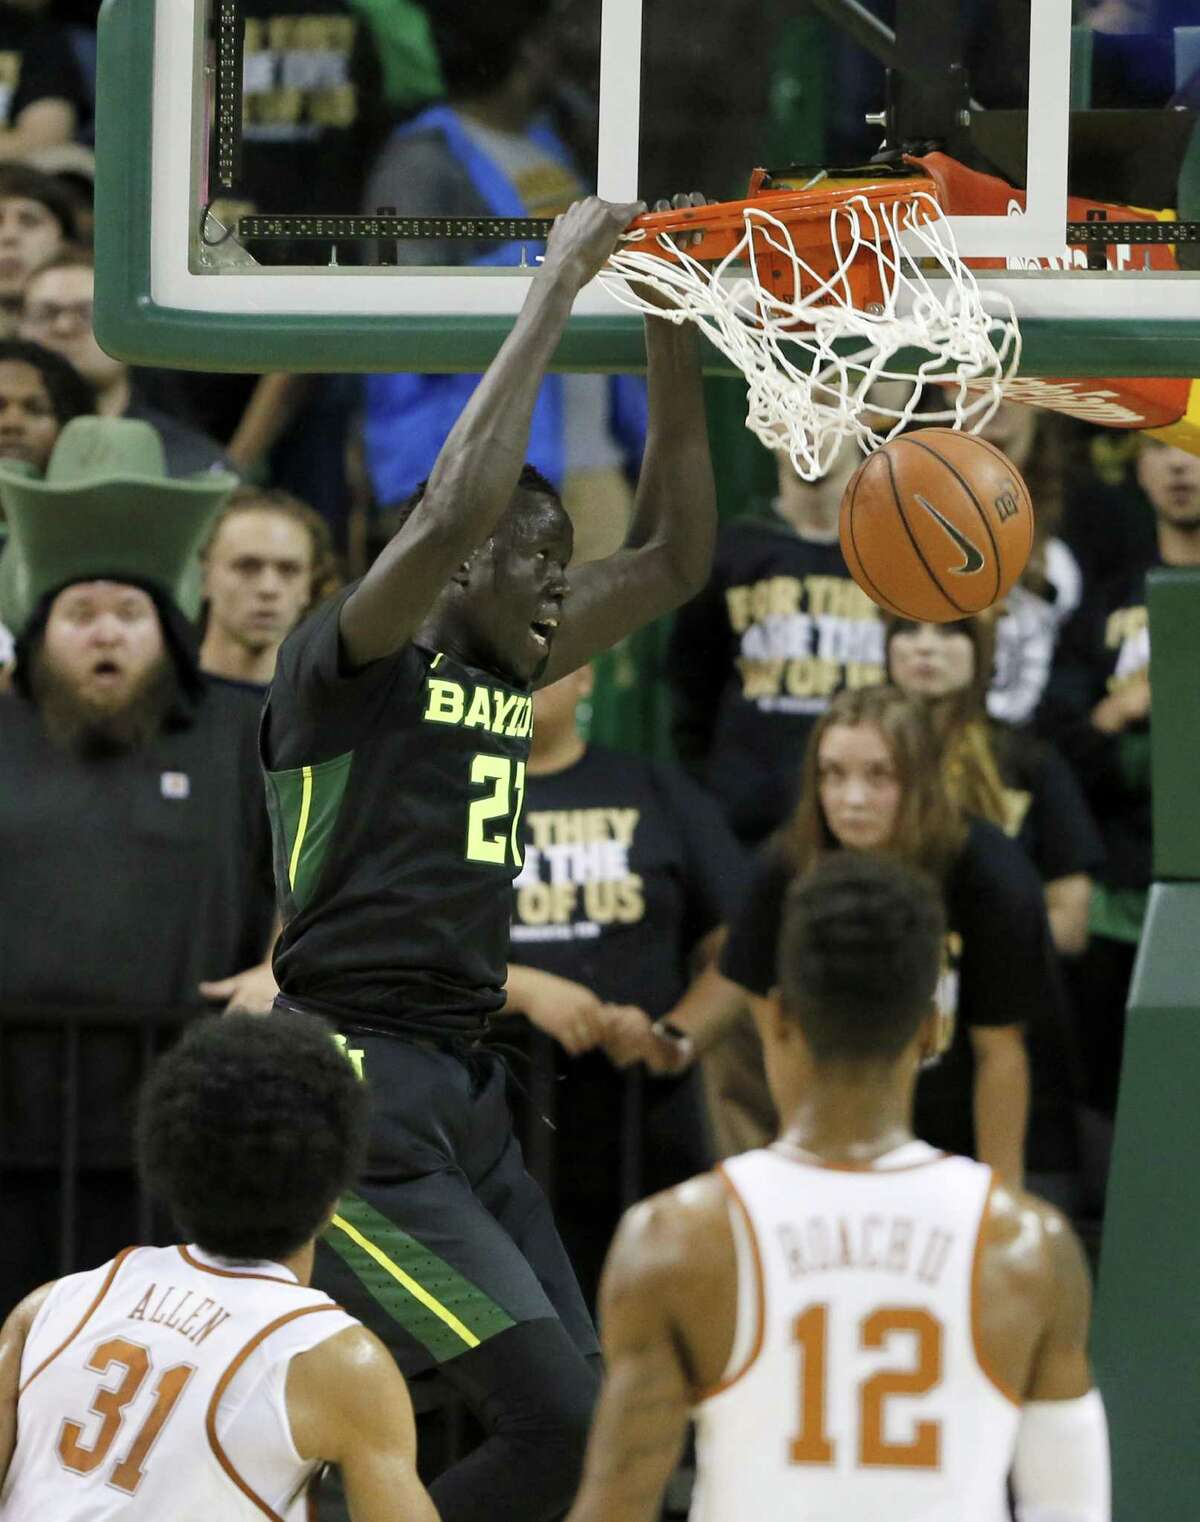 Baylor’s Nuni Omot dunks as Texas’ Jarrett Allen (left) and Kerwin Roach look on during the first half at the Ferrell Center.